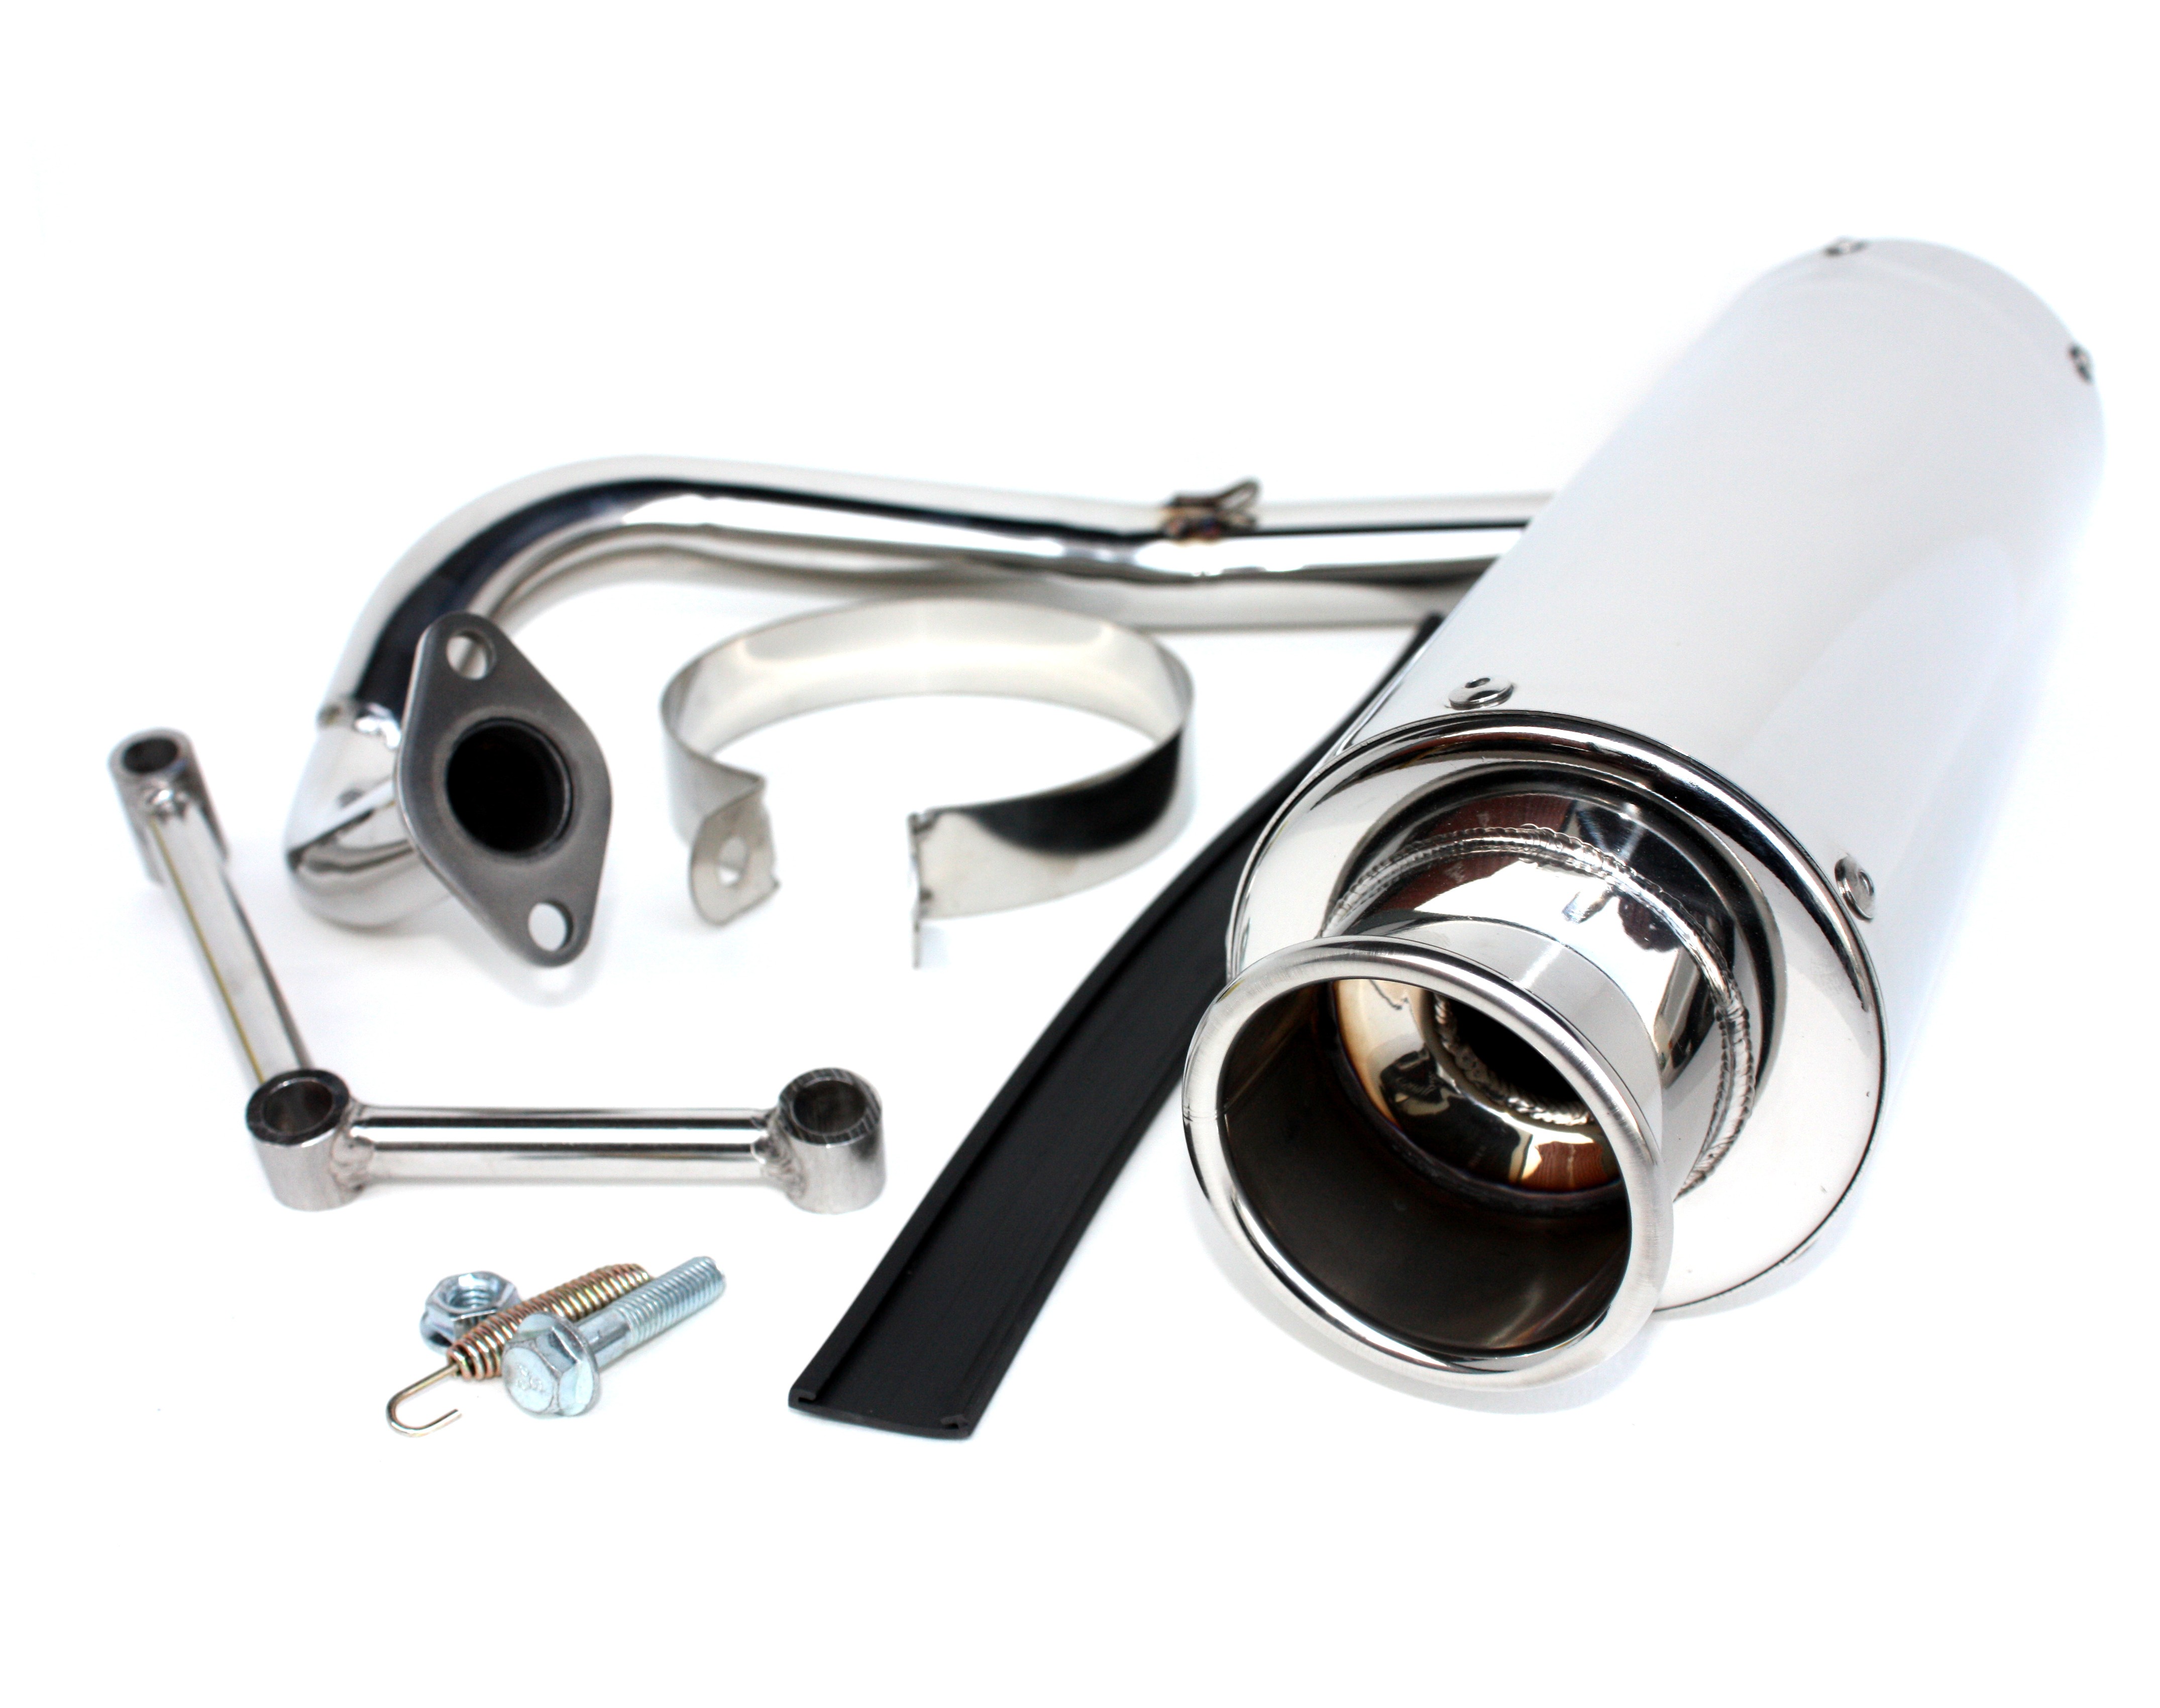 Ridgeyard Scooter Performance Exhaust Pipe Fits For GY6 125/150cc Aluminum Black 